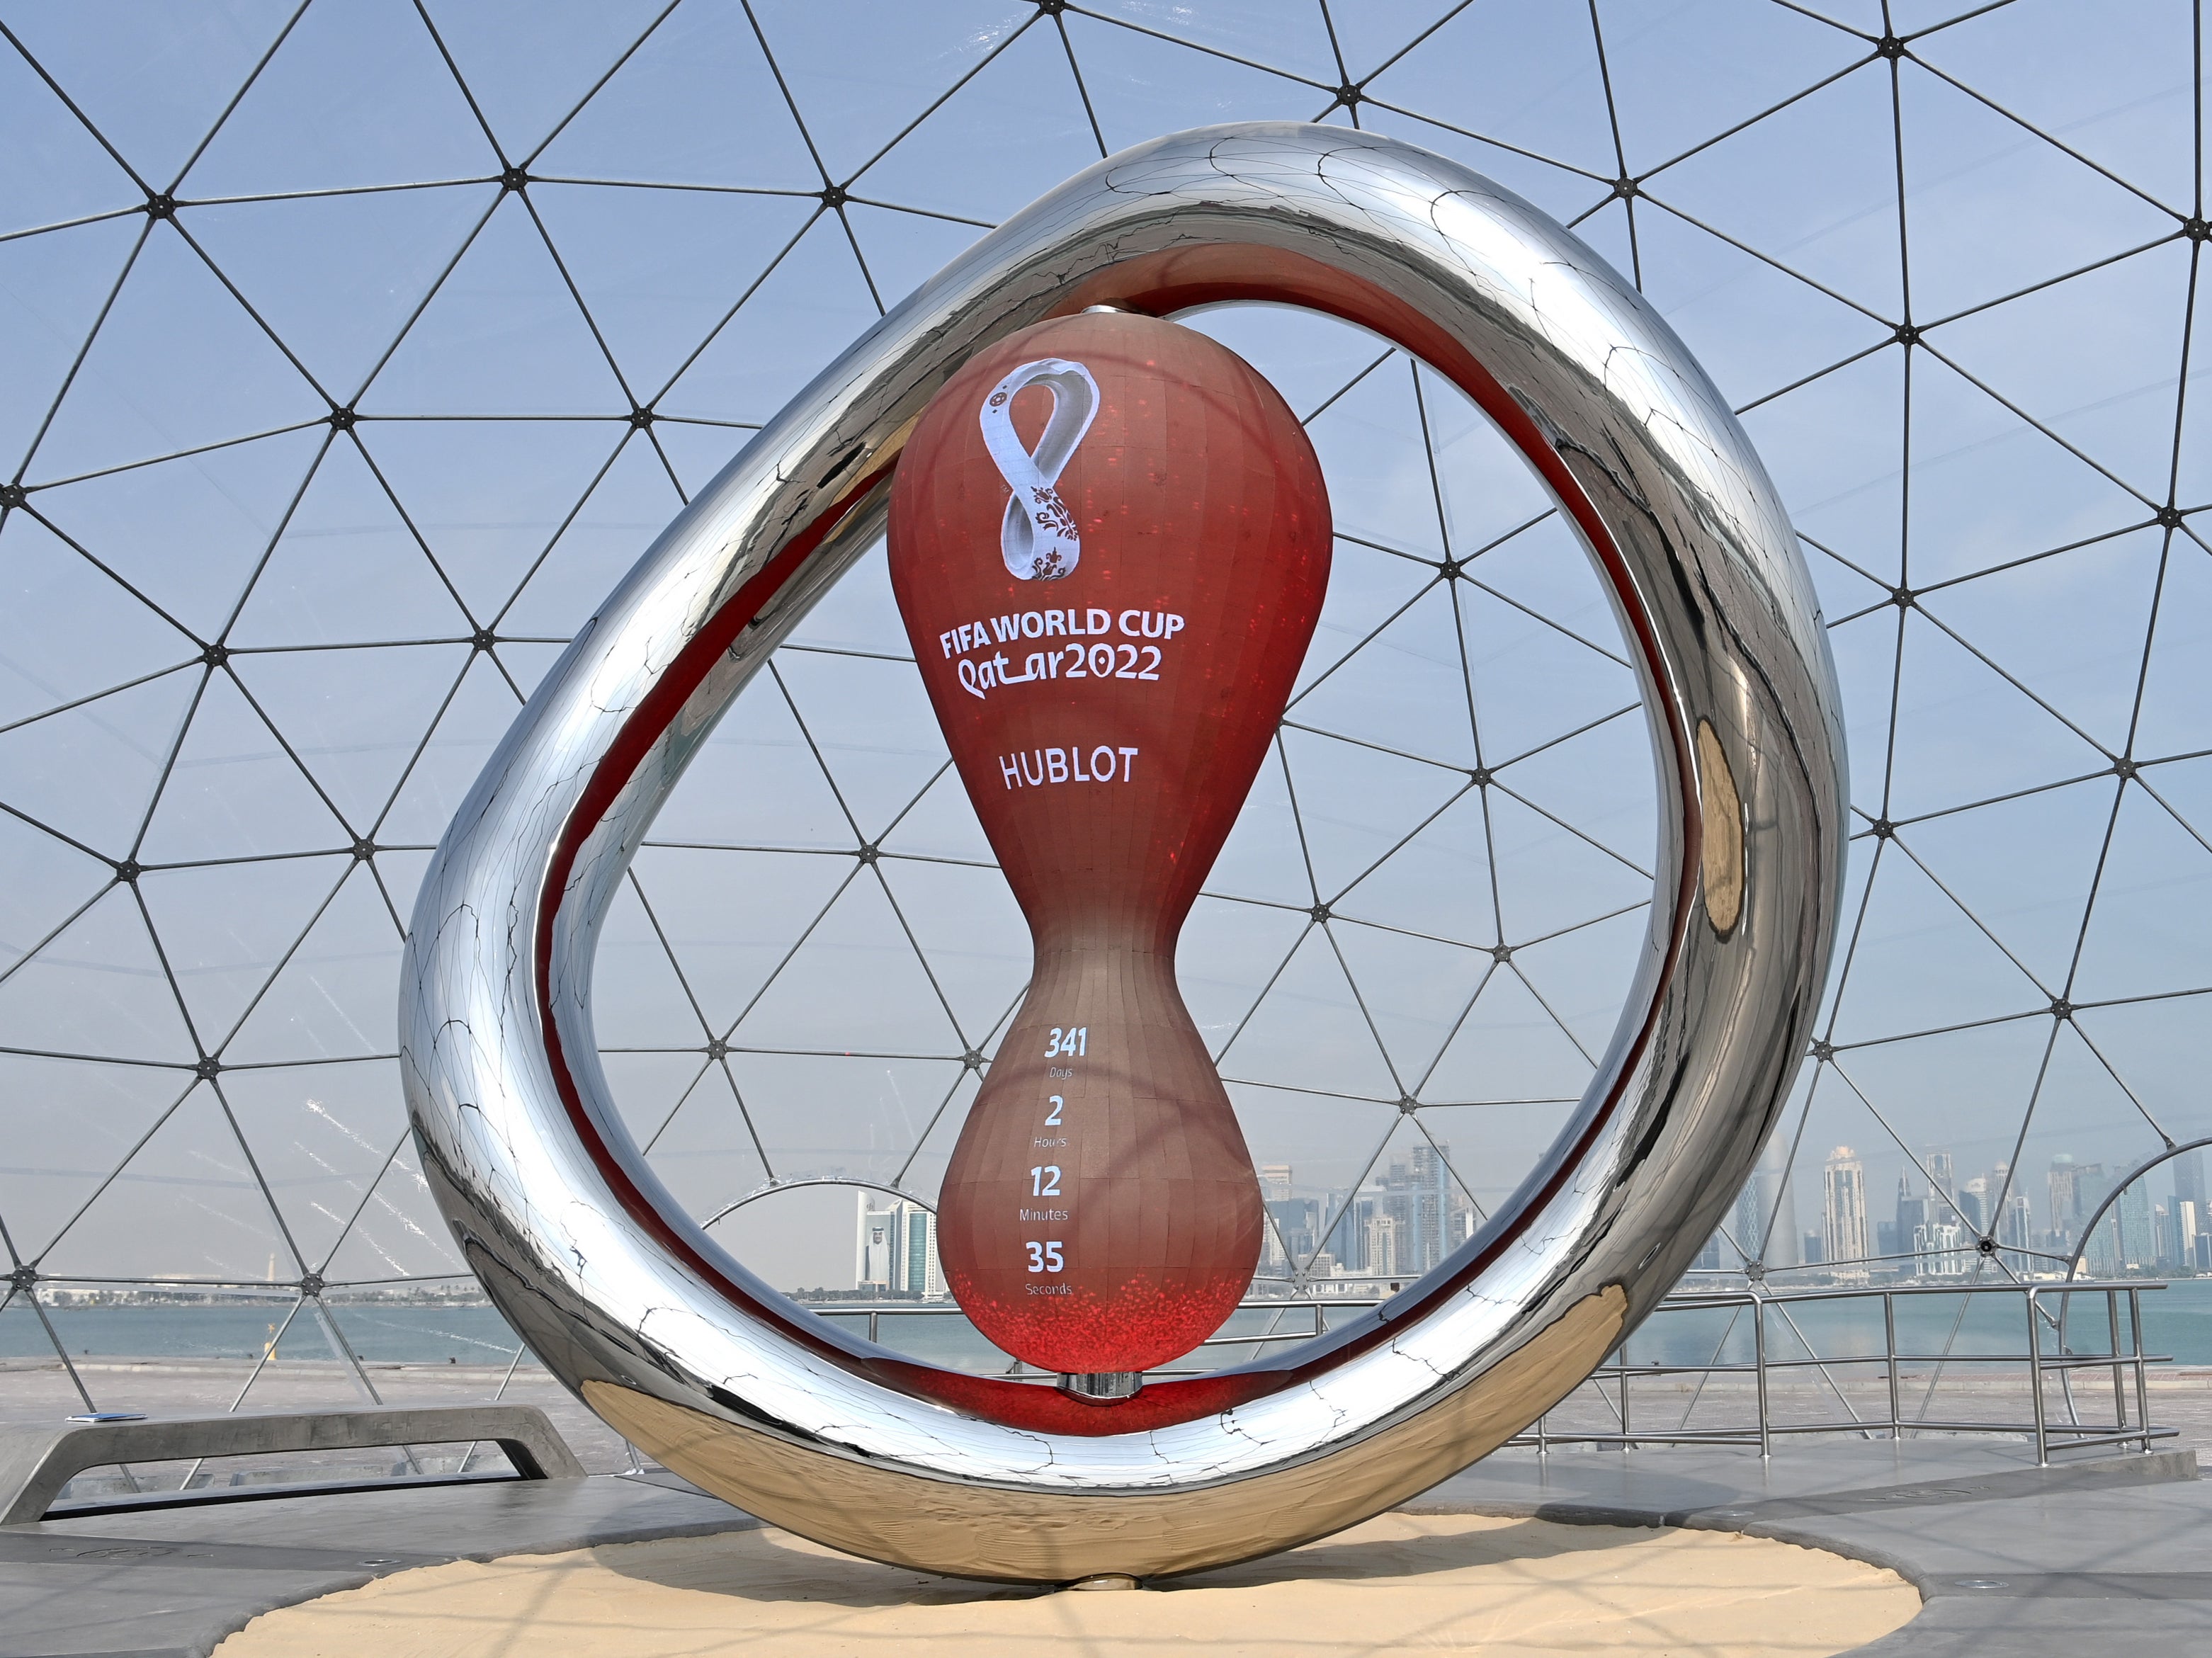 Tickets for the Qatar World Cup are on sale